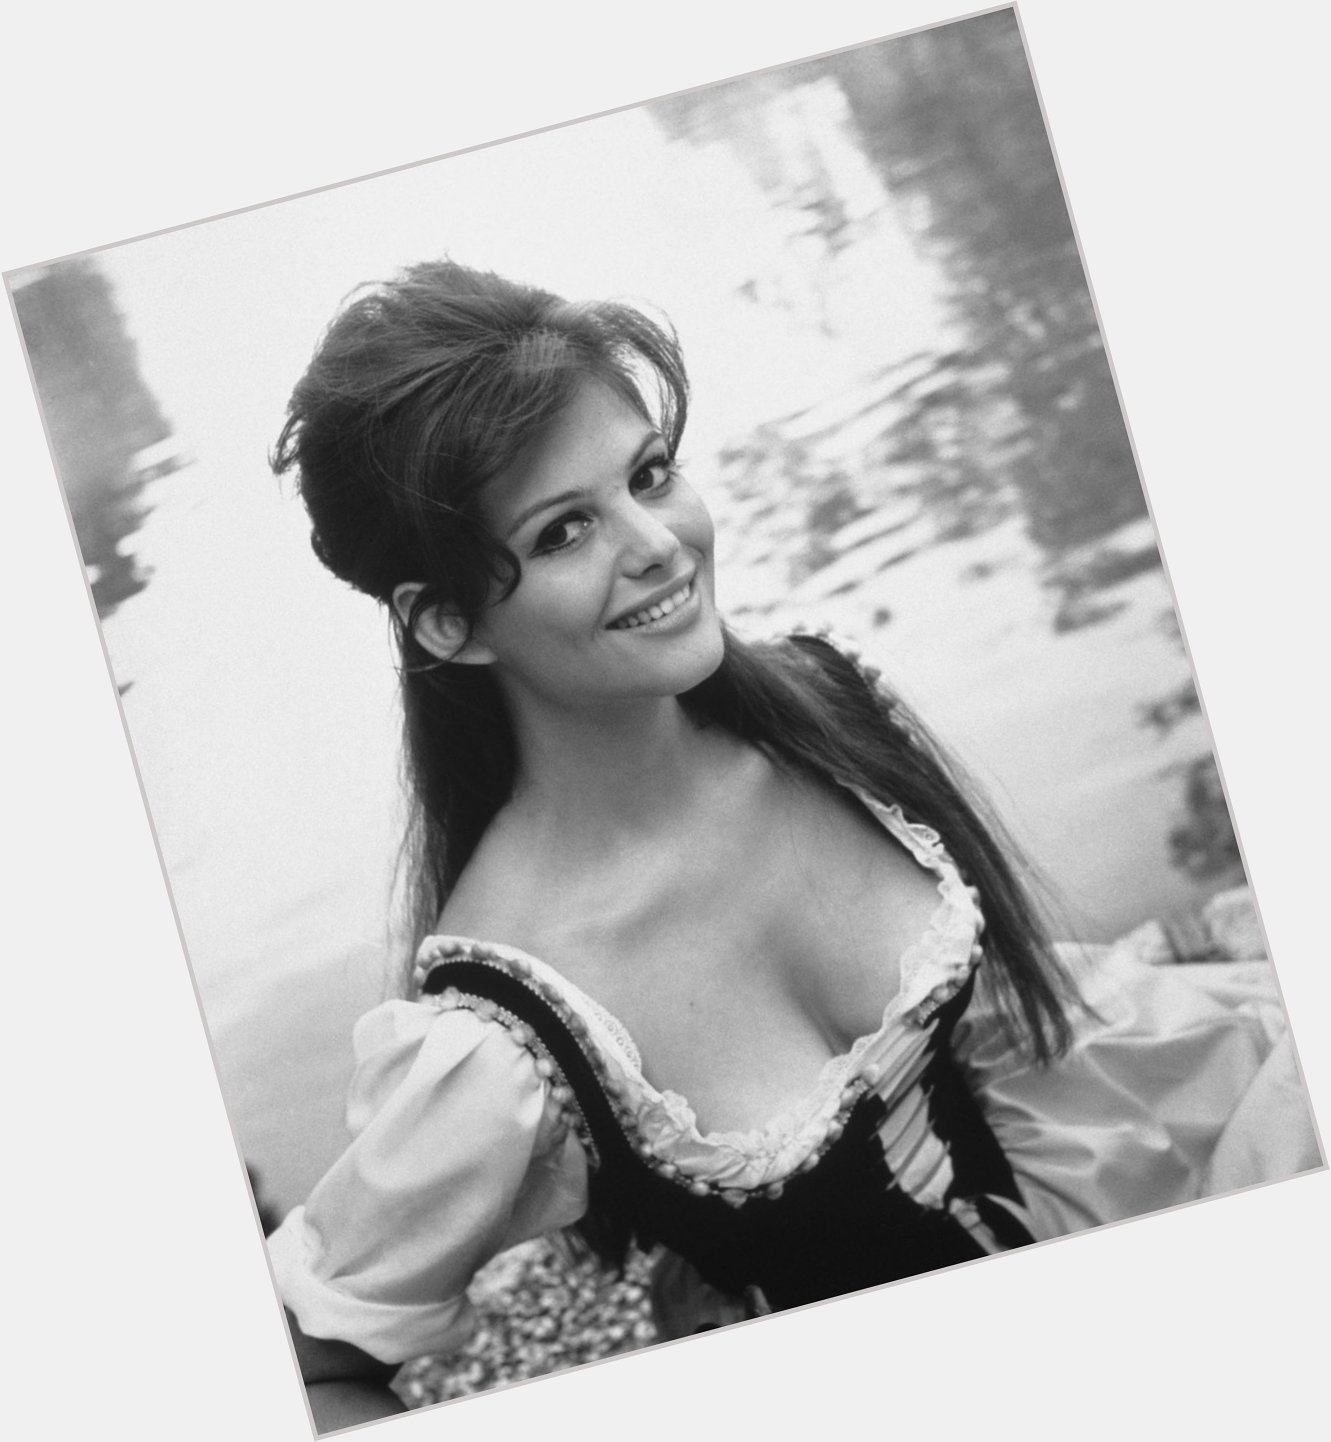 Wishing the lovely and talented Claudia Cardinale a very, very happy birthday today! 